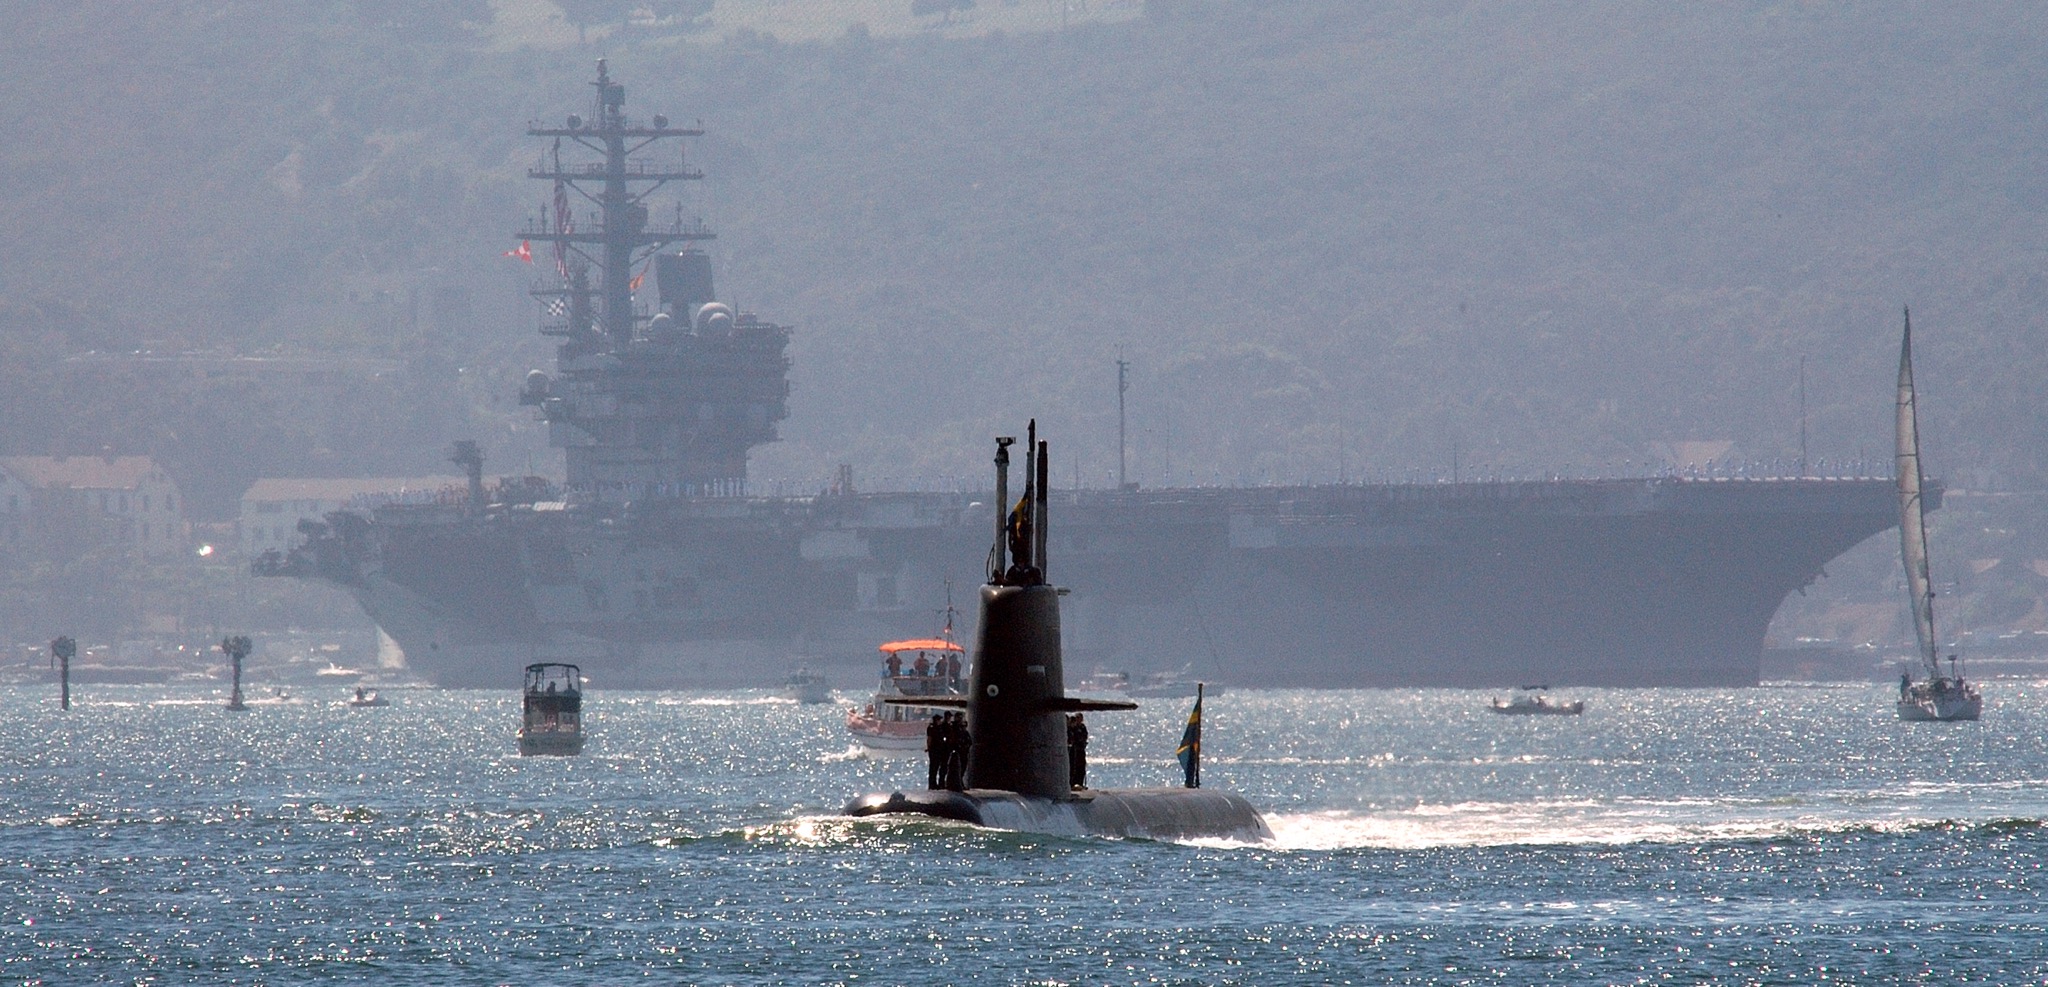 Swedish sub Gotland at Naval Station San Diego, Calif. with USS Ronald Reagan (CVN-76) in the background. US Navy Photo